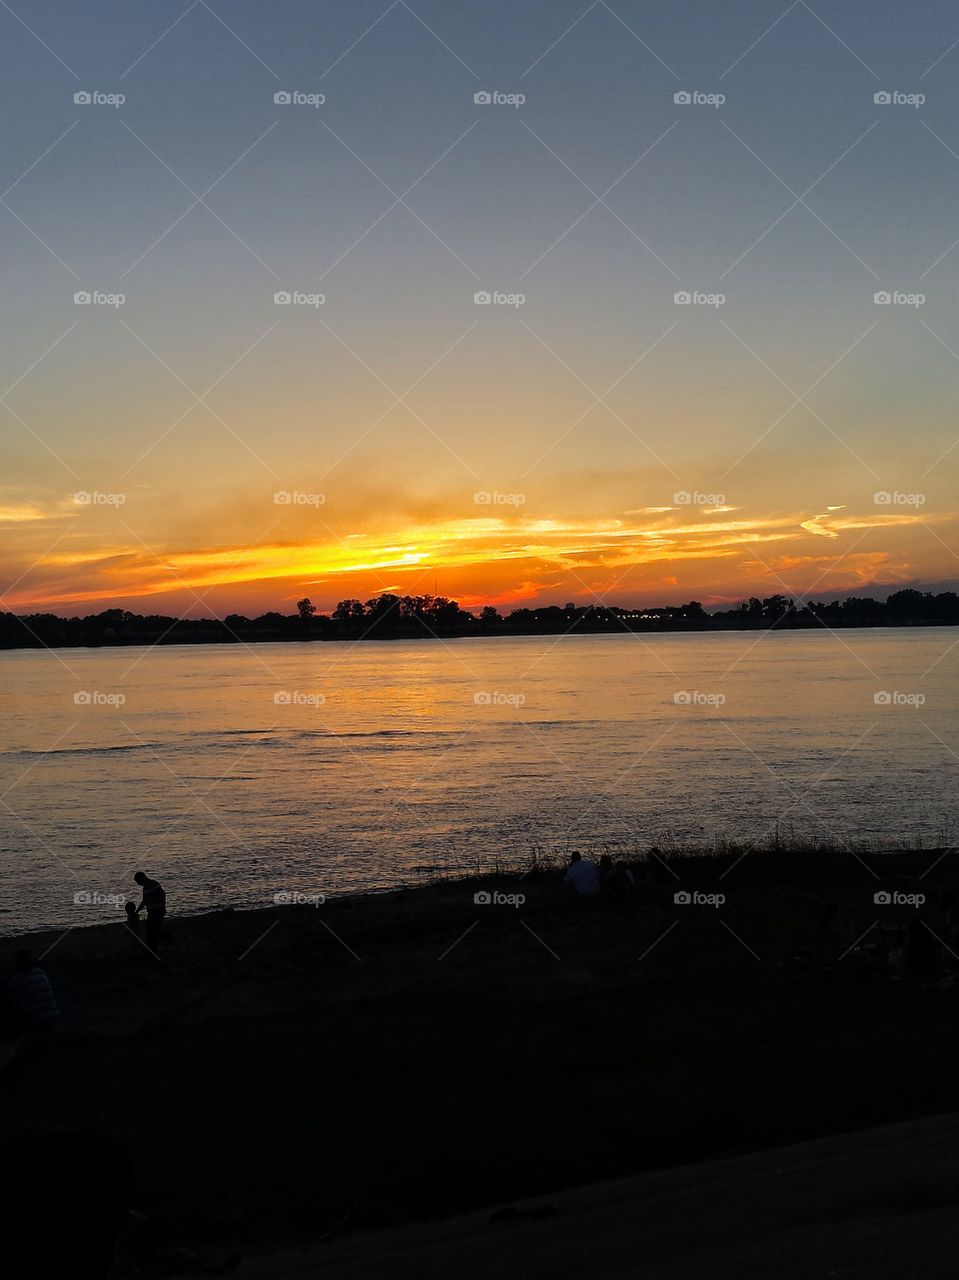 Beautiful view of the sunset on the Mississippi River in Baton Rouge Louisiana.